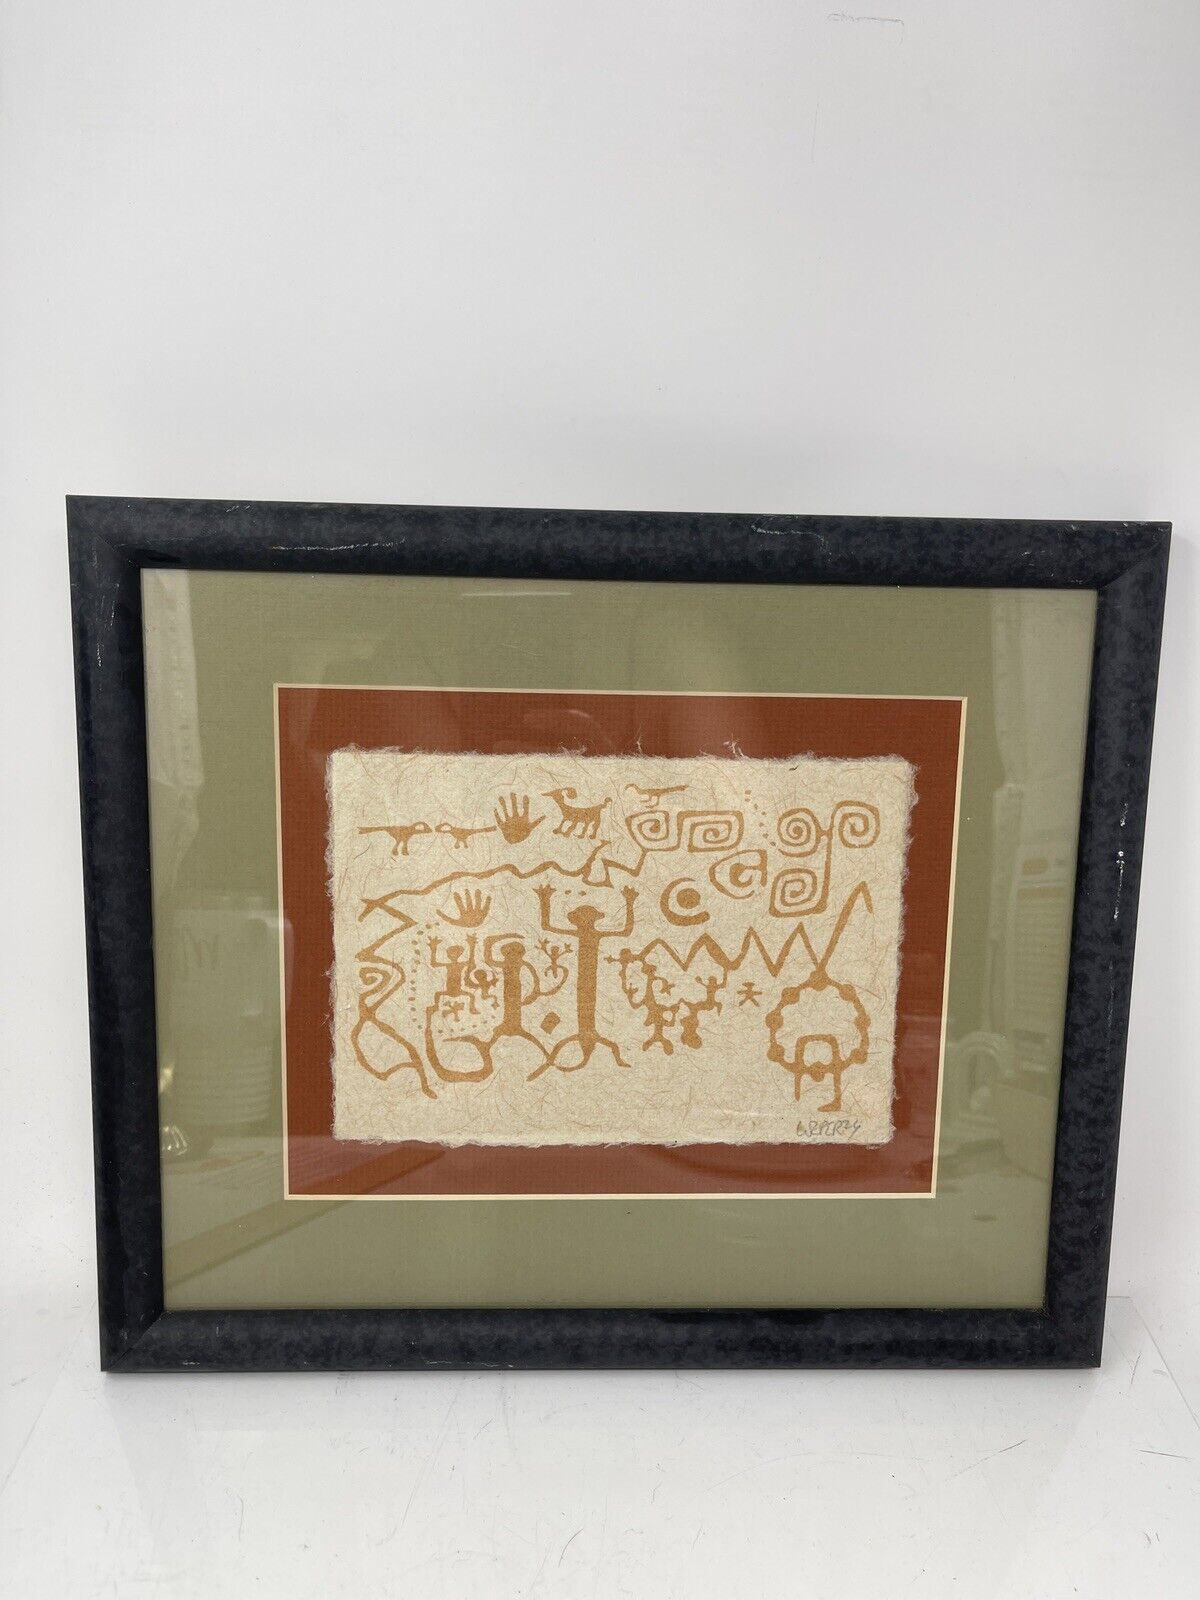 Mesa Verde Petroglyph Reproduction Art Handcrafted Jute & Recycle Paper Signed